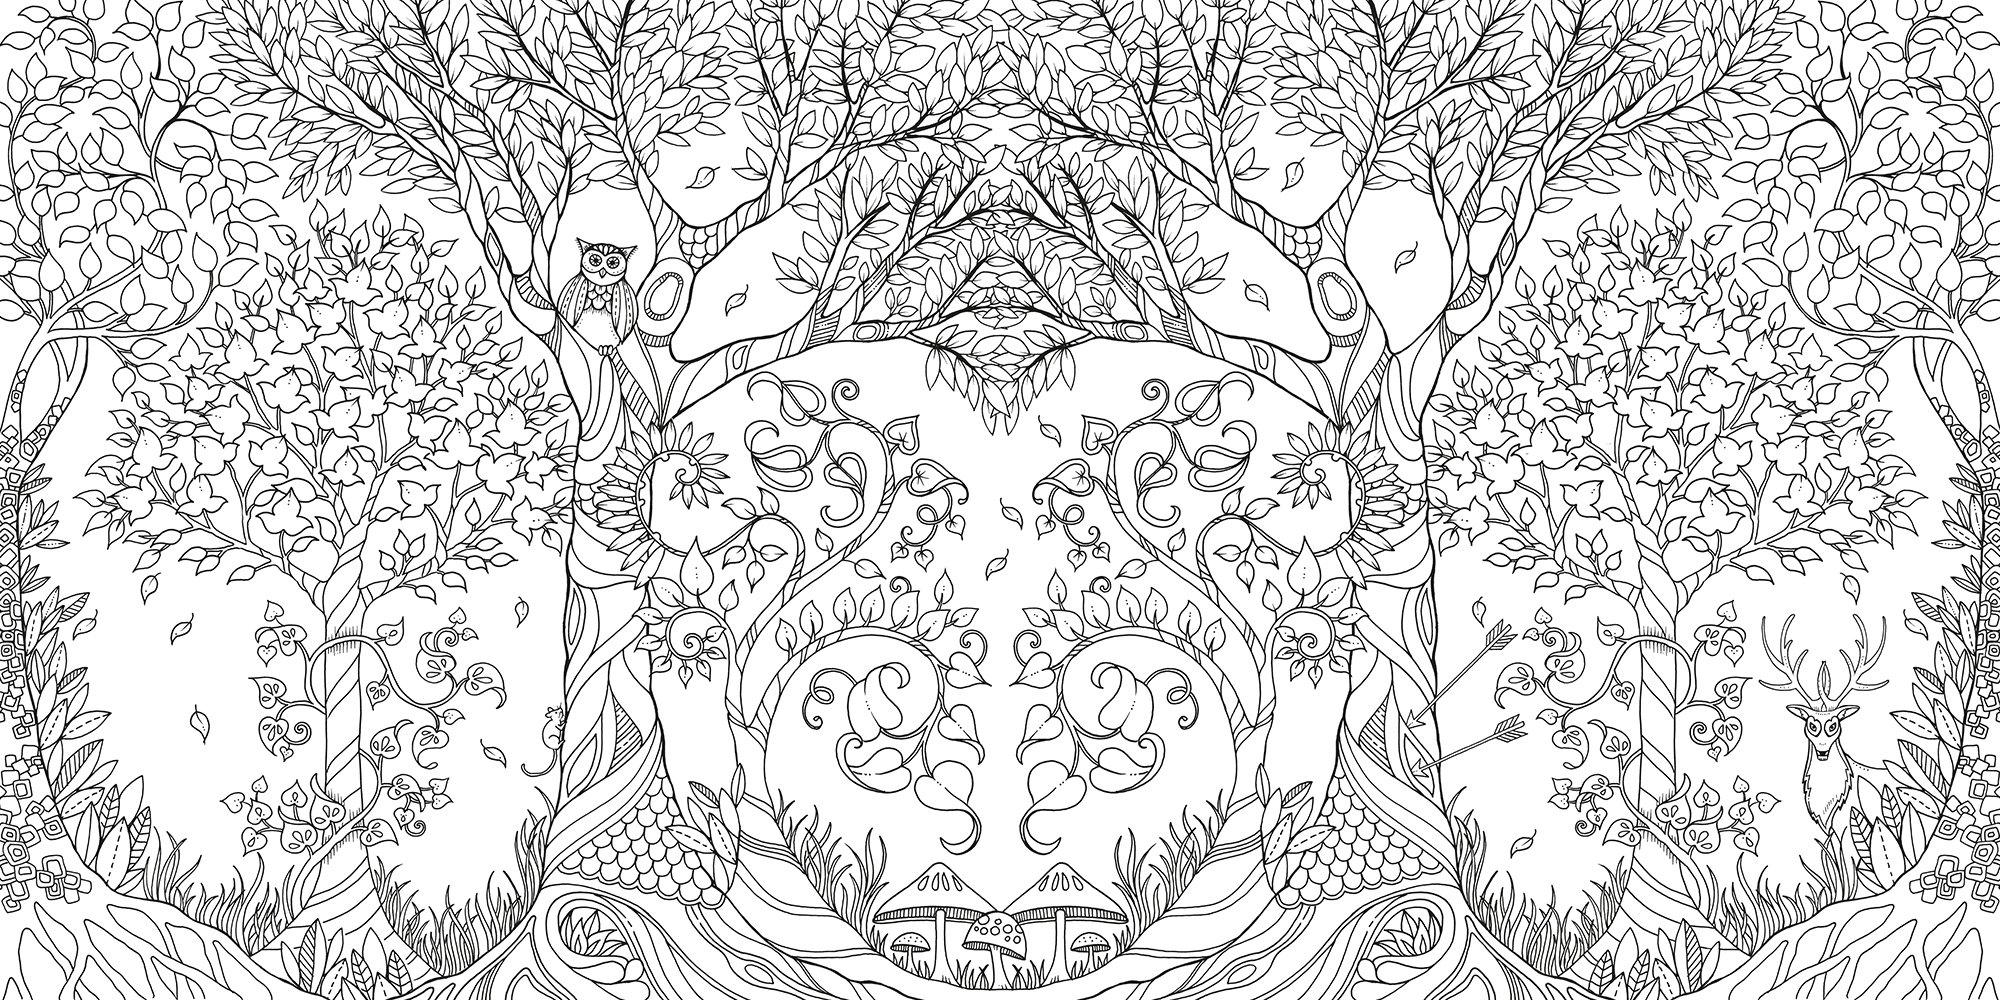 Enchanted Forest: An Inky Quest & Coloring Book - Adult Coloring Book Club